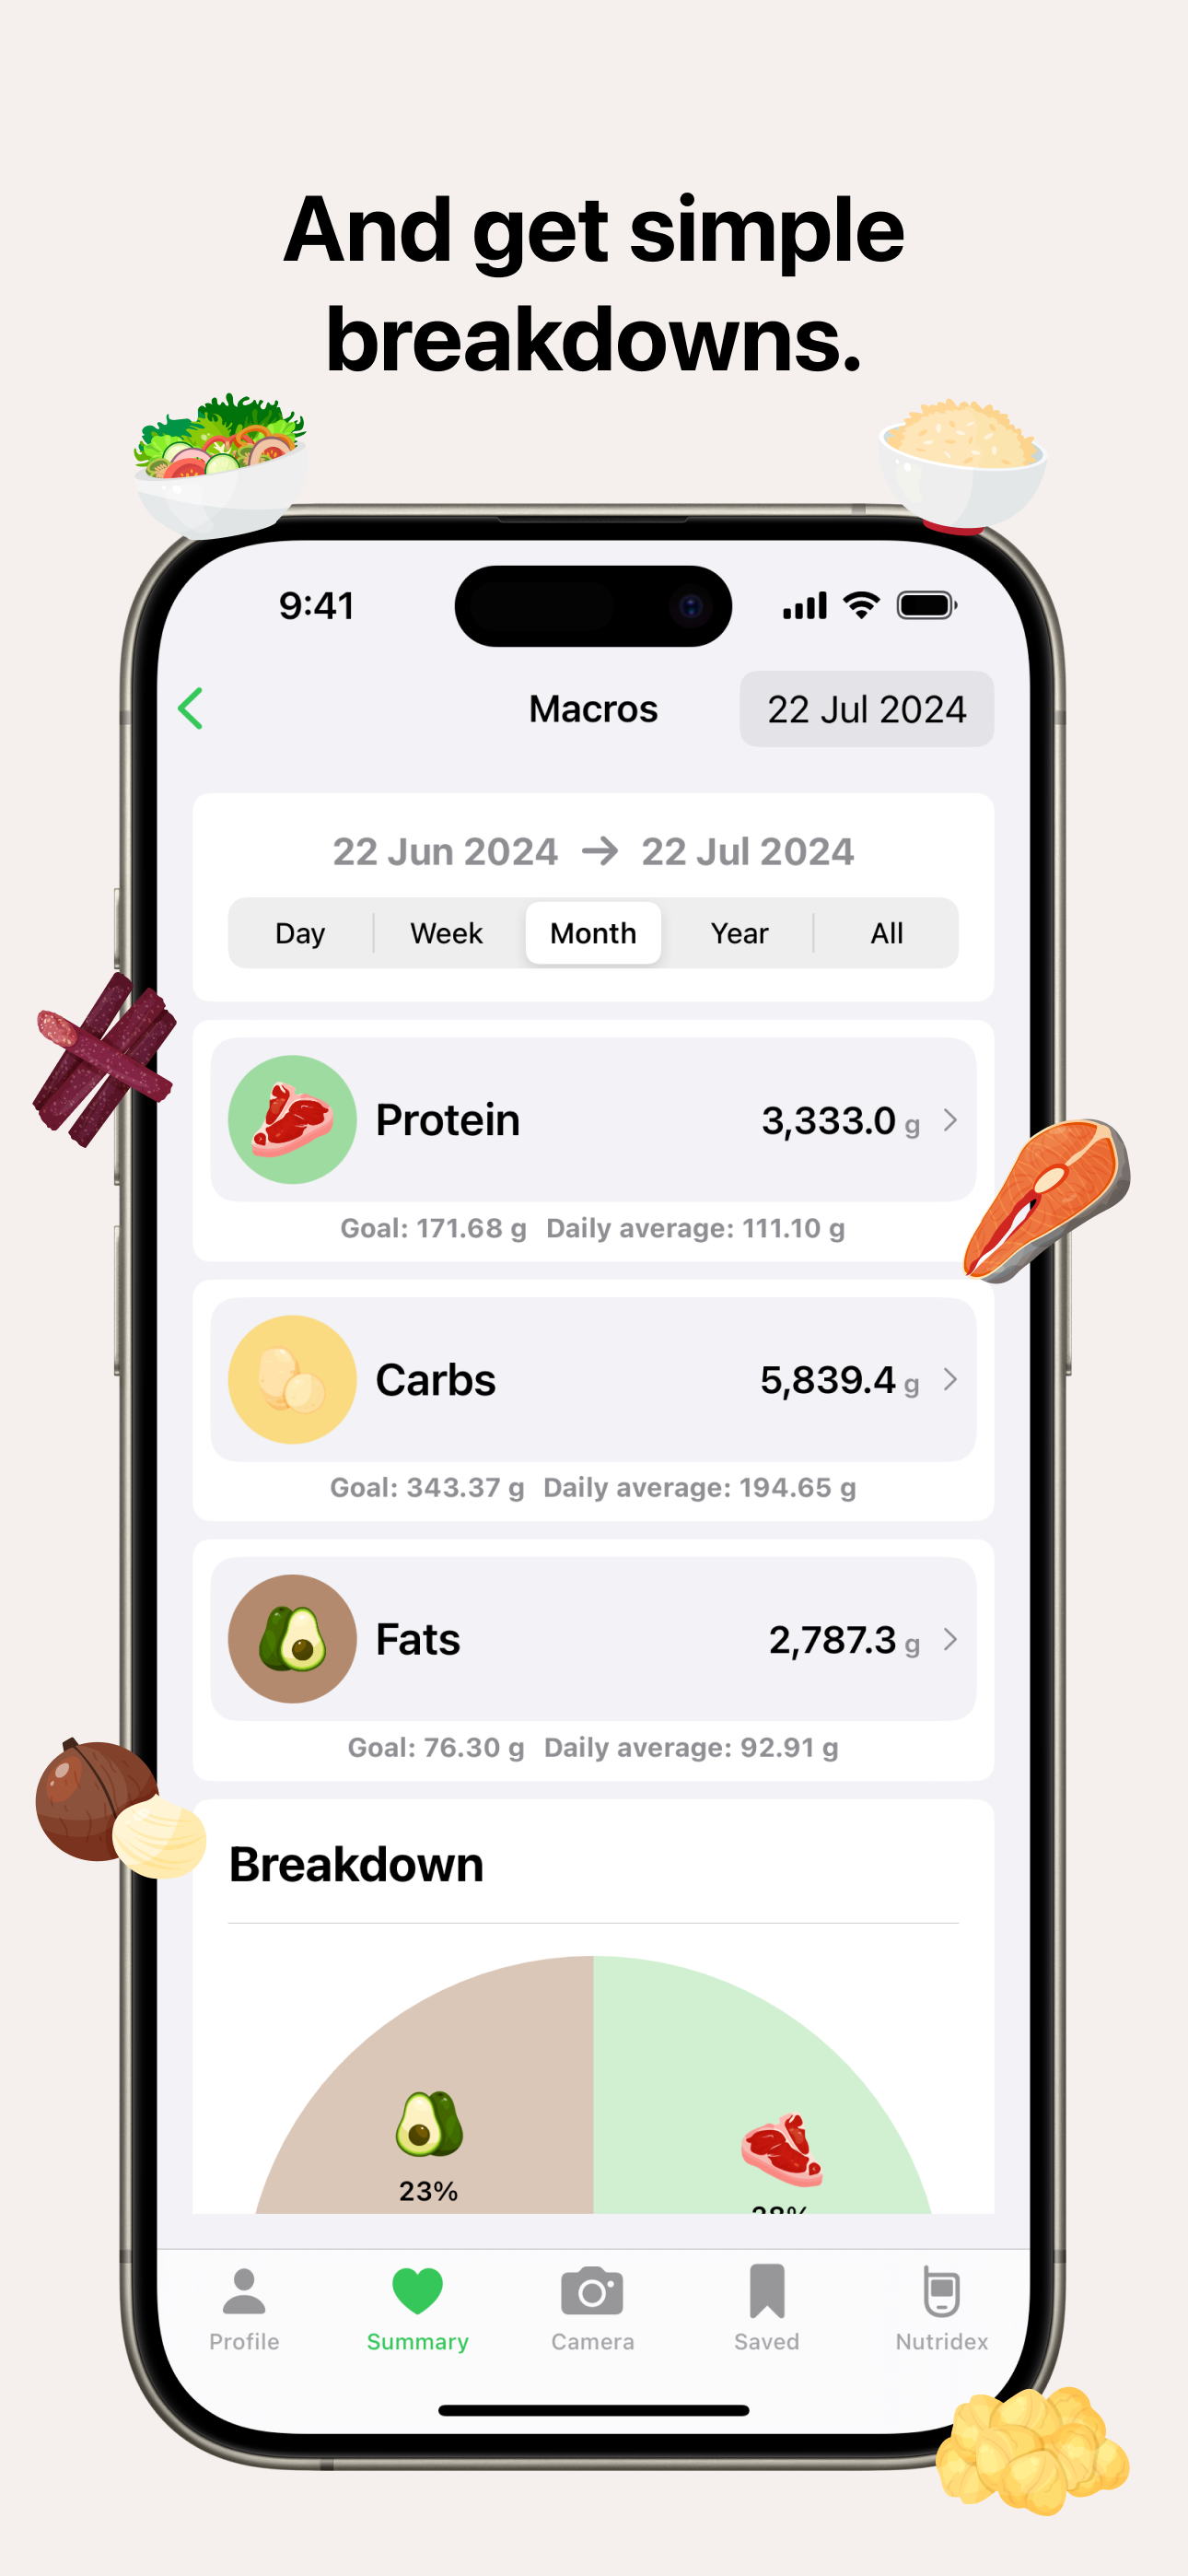 Nutrify app screenshot: A smartphone screen showing the 'Macros' summary with the title 'And get simple breakdowns.' The date range is from 22 Jun 2024 to 22 Jul 2024. Protein intake is 3,333.0g (goal: 171.68g, daily average: 111.10g), carbs intake is 5,839.4g (goal: 343.37g, daily average: 194.65g), and fats intake is 2,787.3g (goal: 76.30g, daily average: 92.91g). A pie chart breakdown at the bottom shows 23% fats and 30% protein. The background is beige with various food icons.